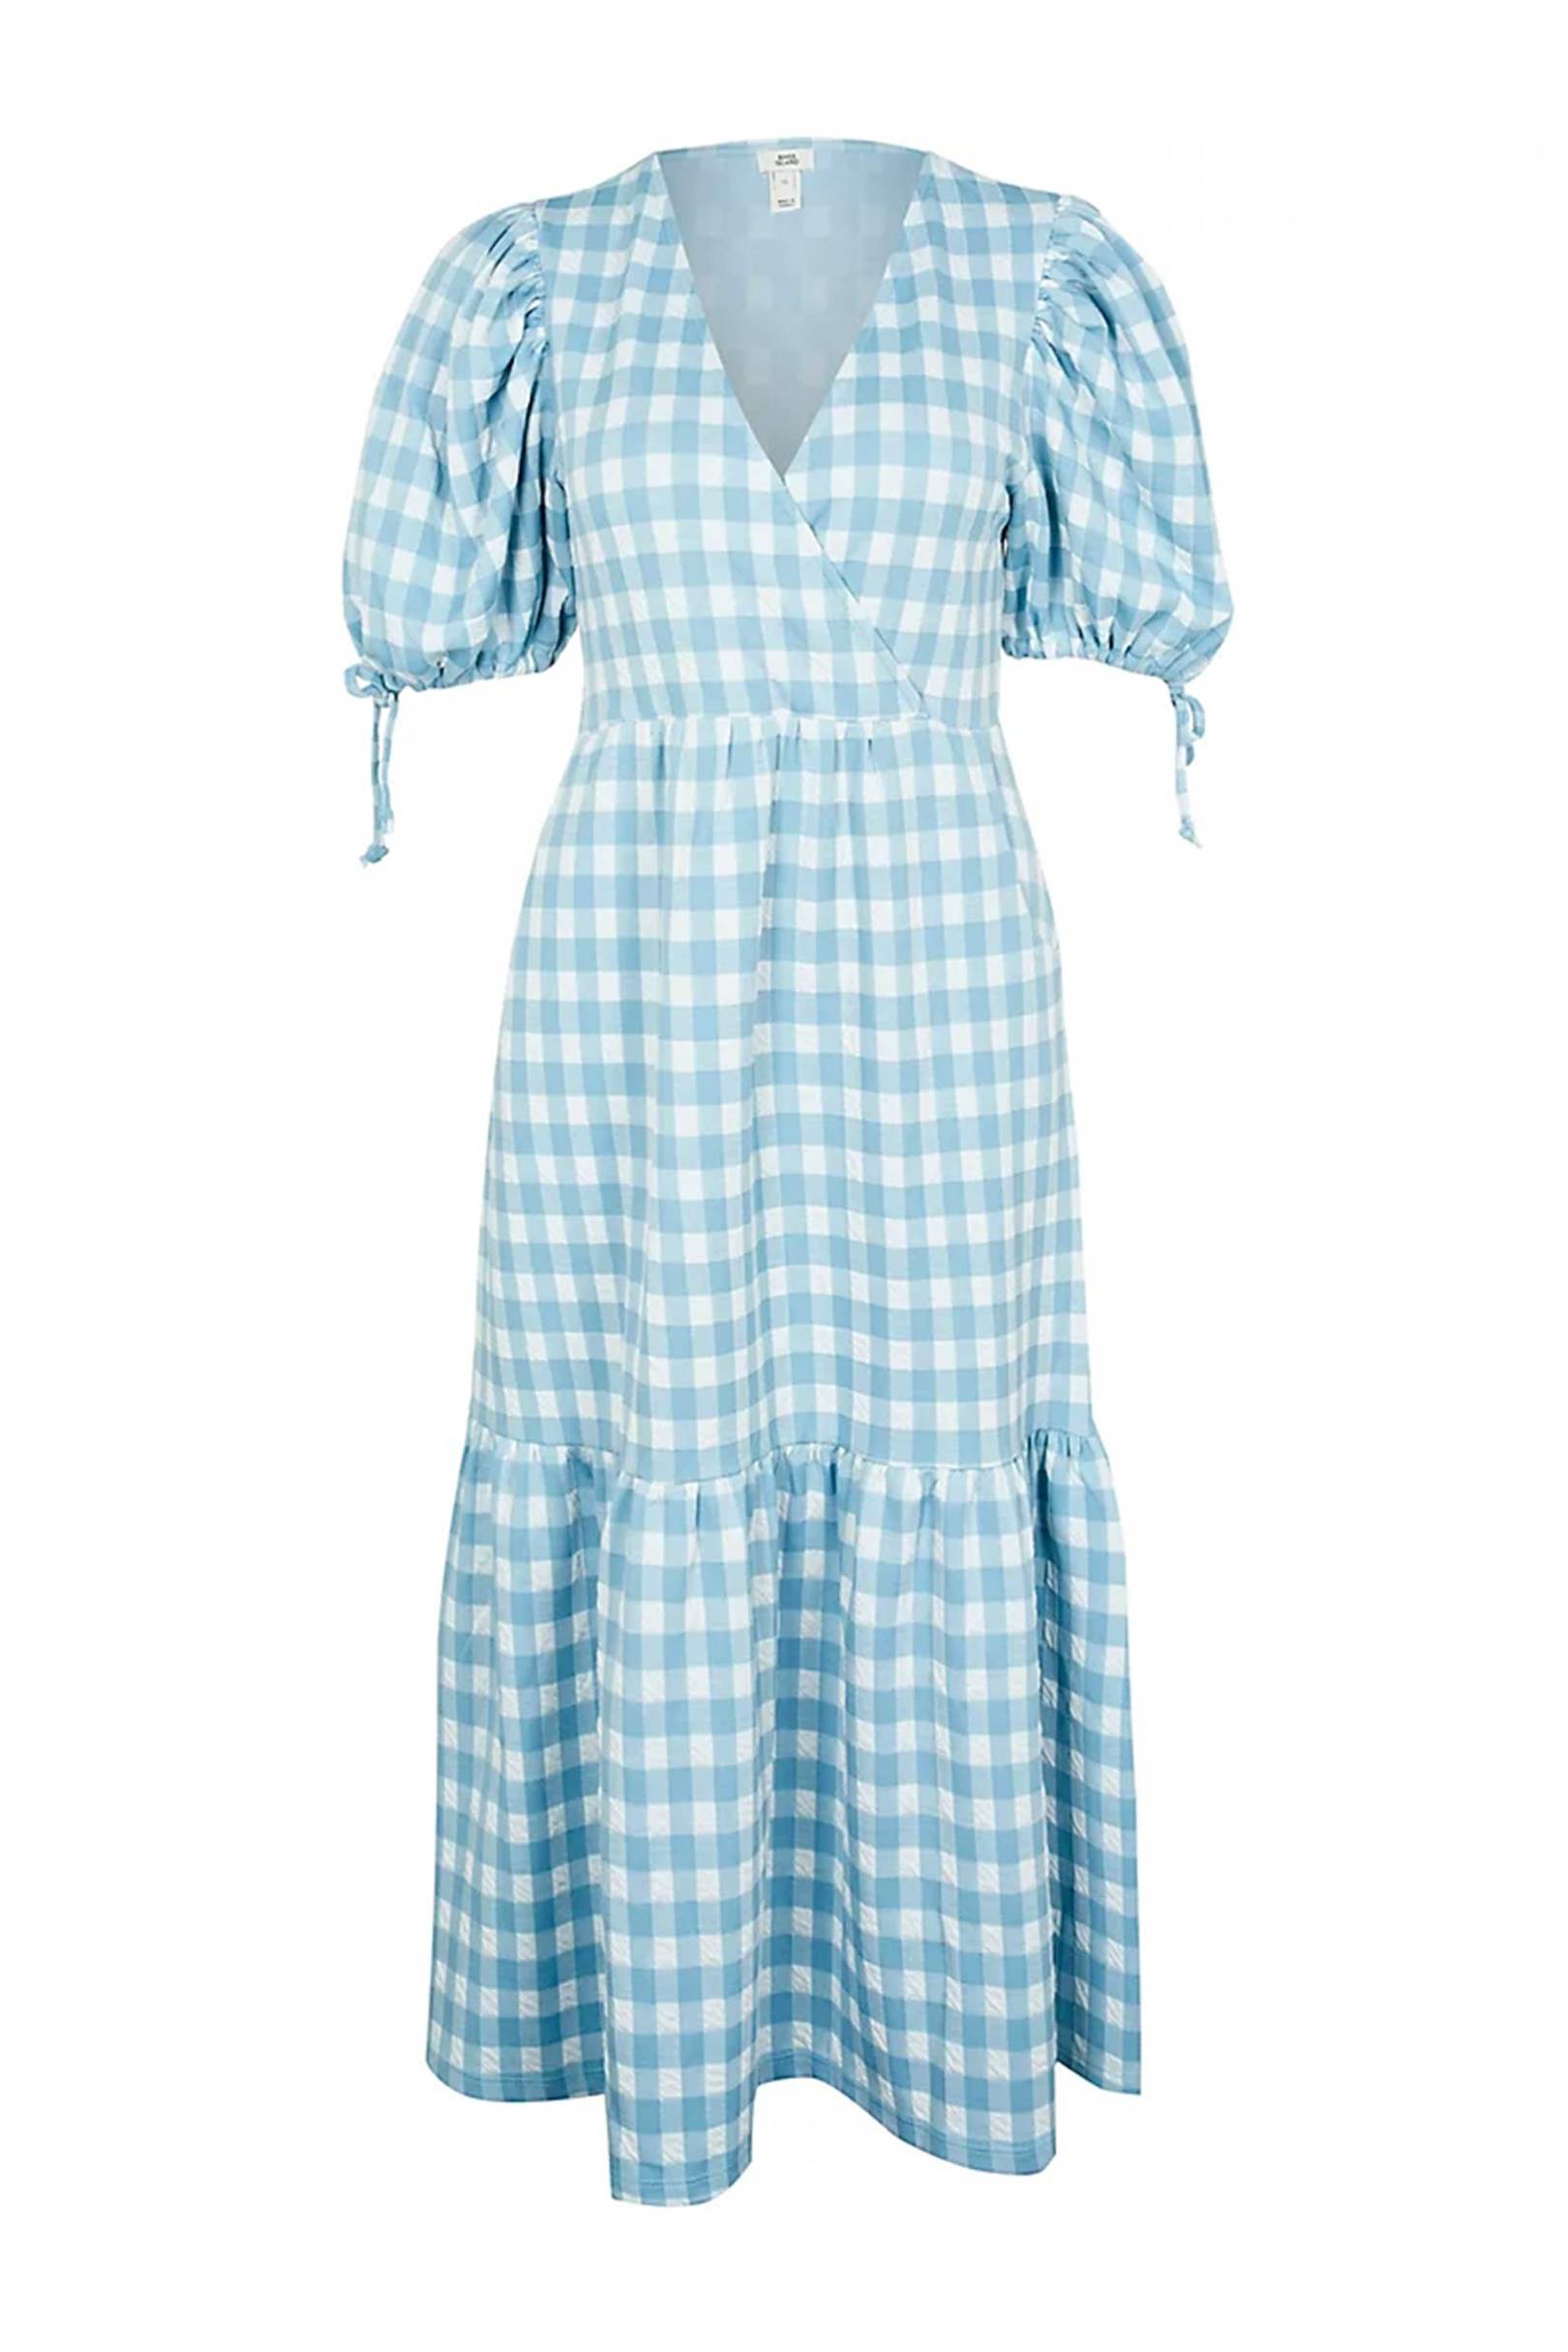 The best 'it' dresses of the summer according to our fashion editor ...